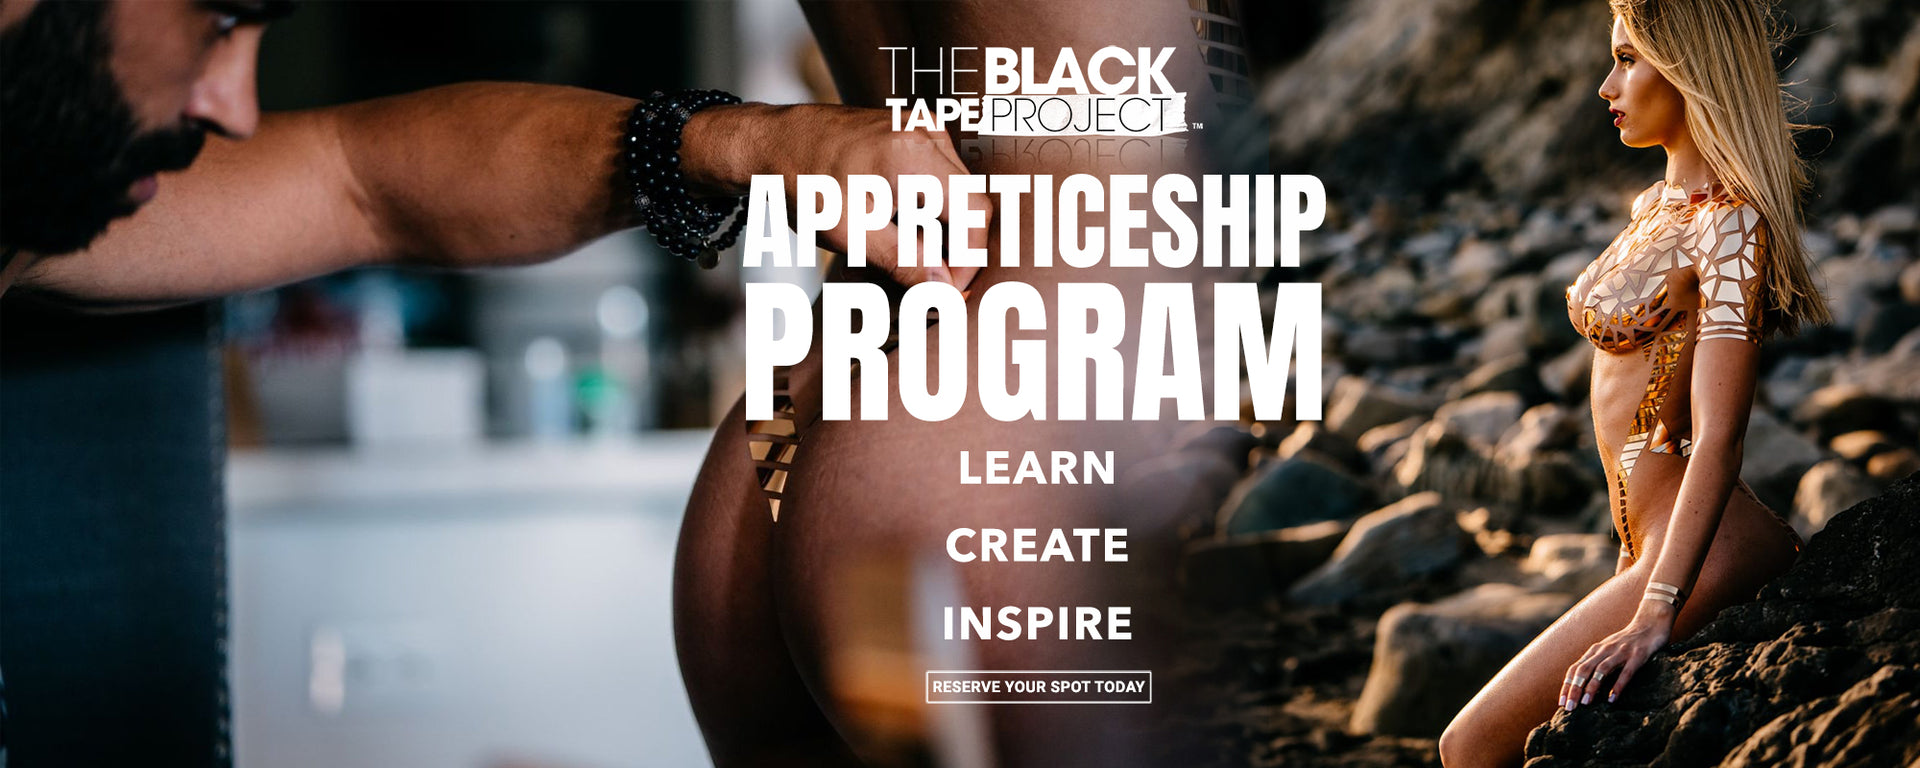 Learn directly from Joel Alvarez and become a Black Tape Project Apprentice today!